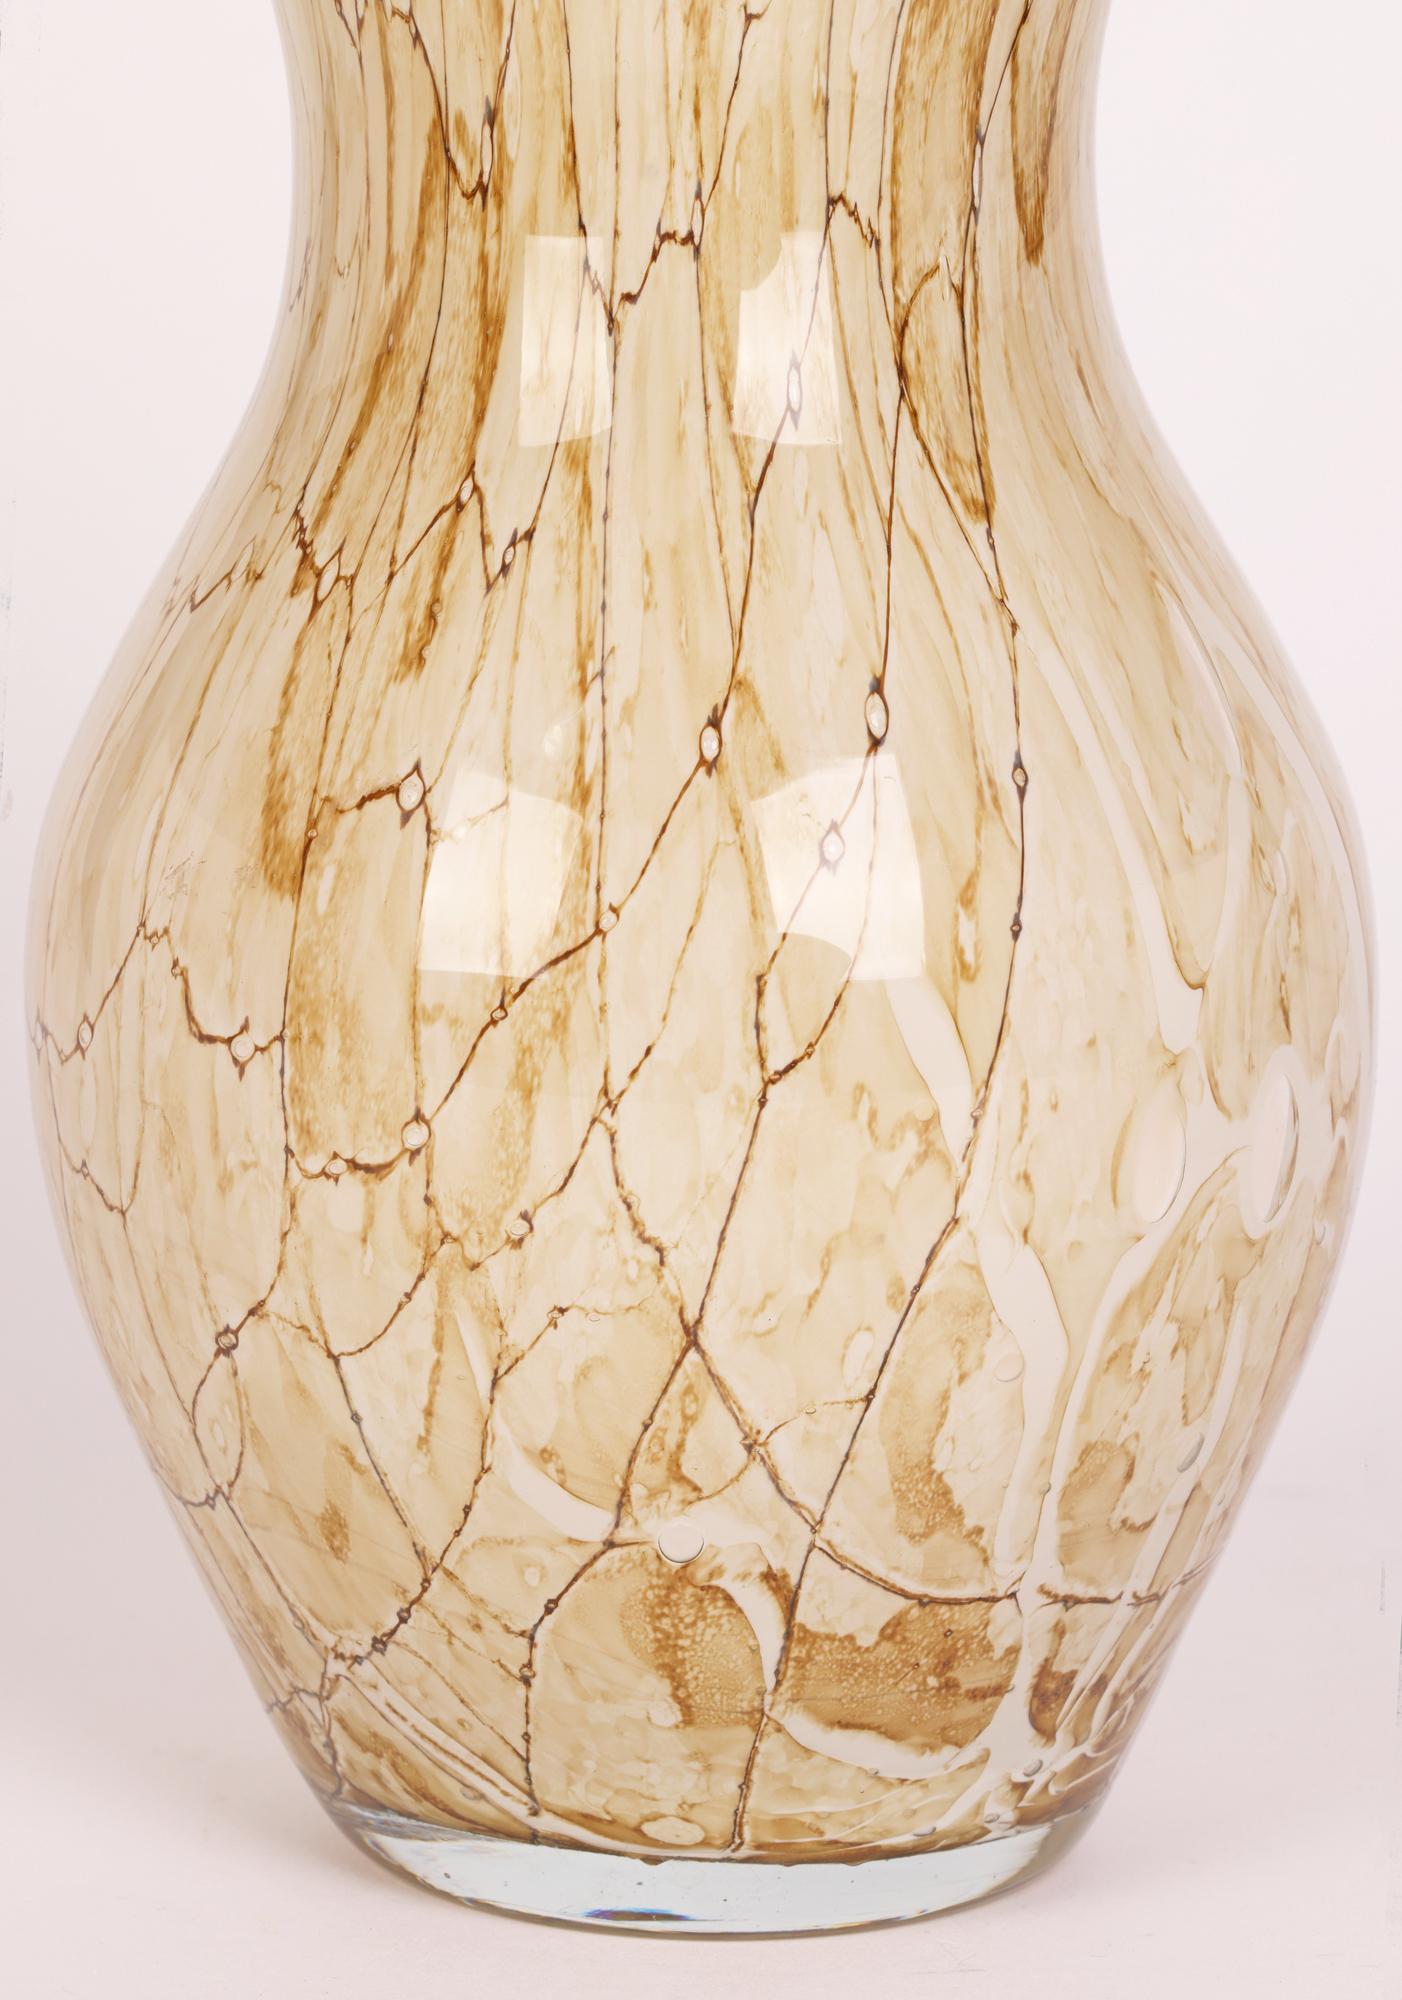 A stylish hand-blown Polish art glass vase attributed to the Jozefina Glass Makers, Krosno and dating from around 1980.

The Josefina factory was founded in Krosno, Poland in 1980 by Jozef Jankowski, a renowned artist and glass blower. The factory